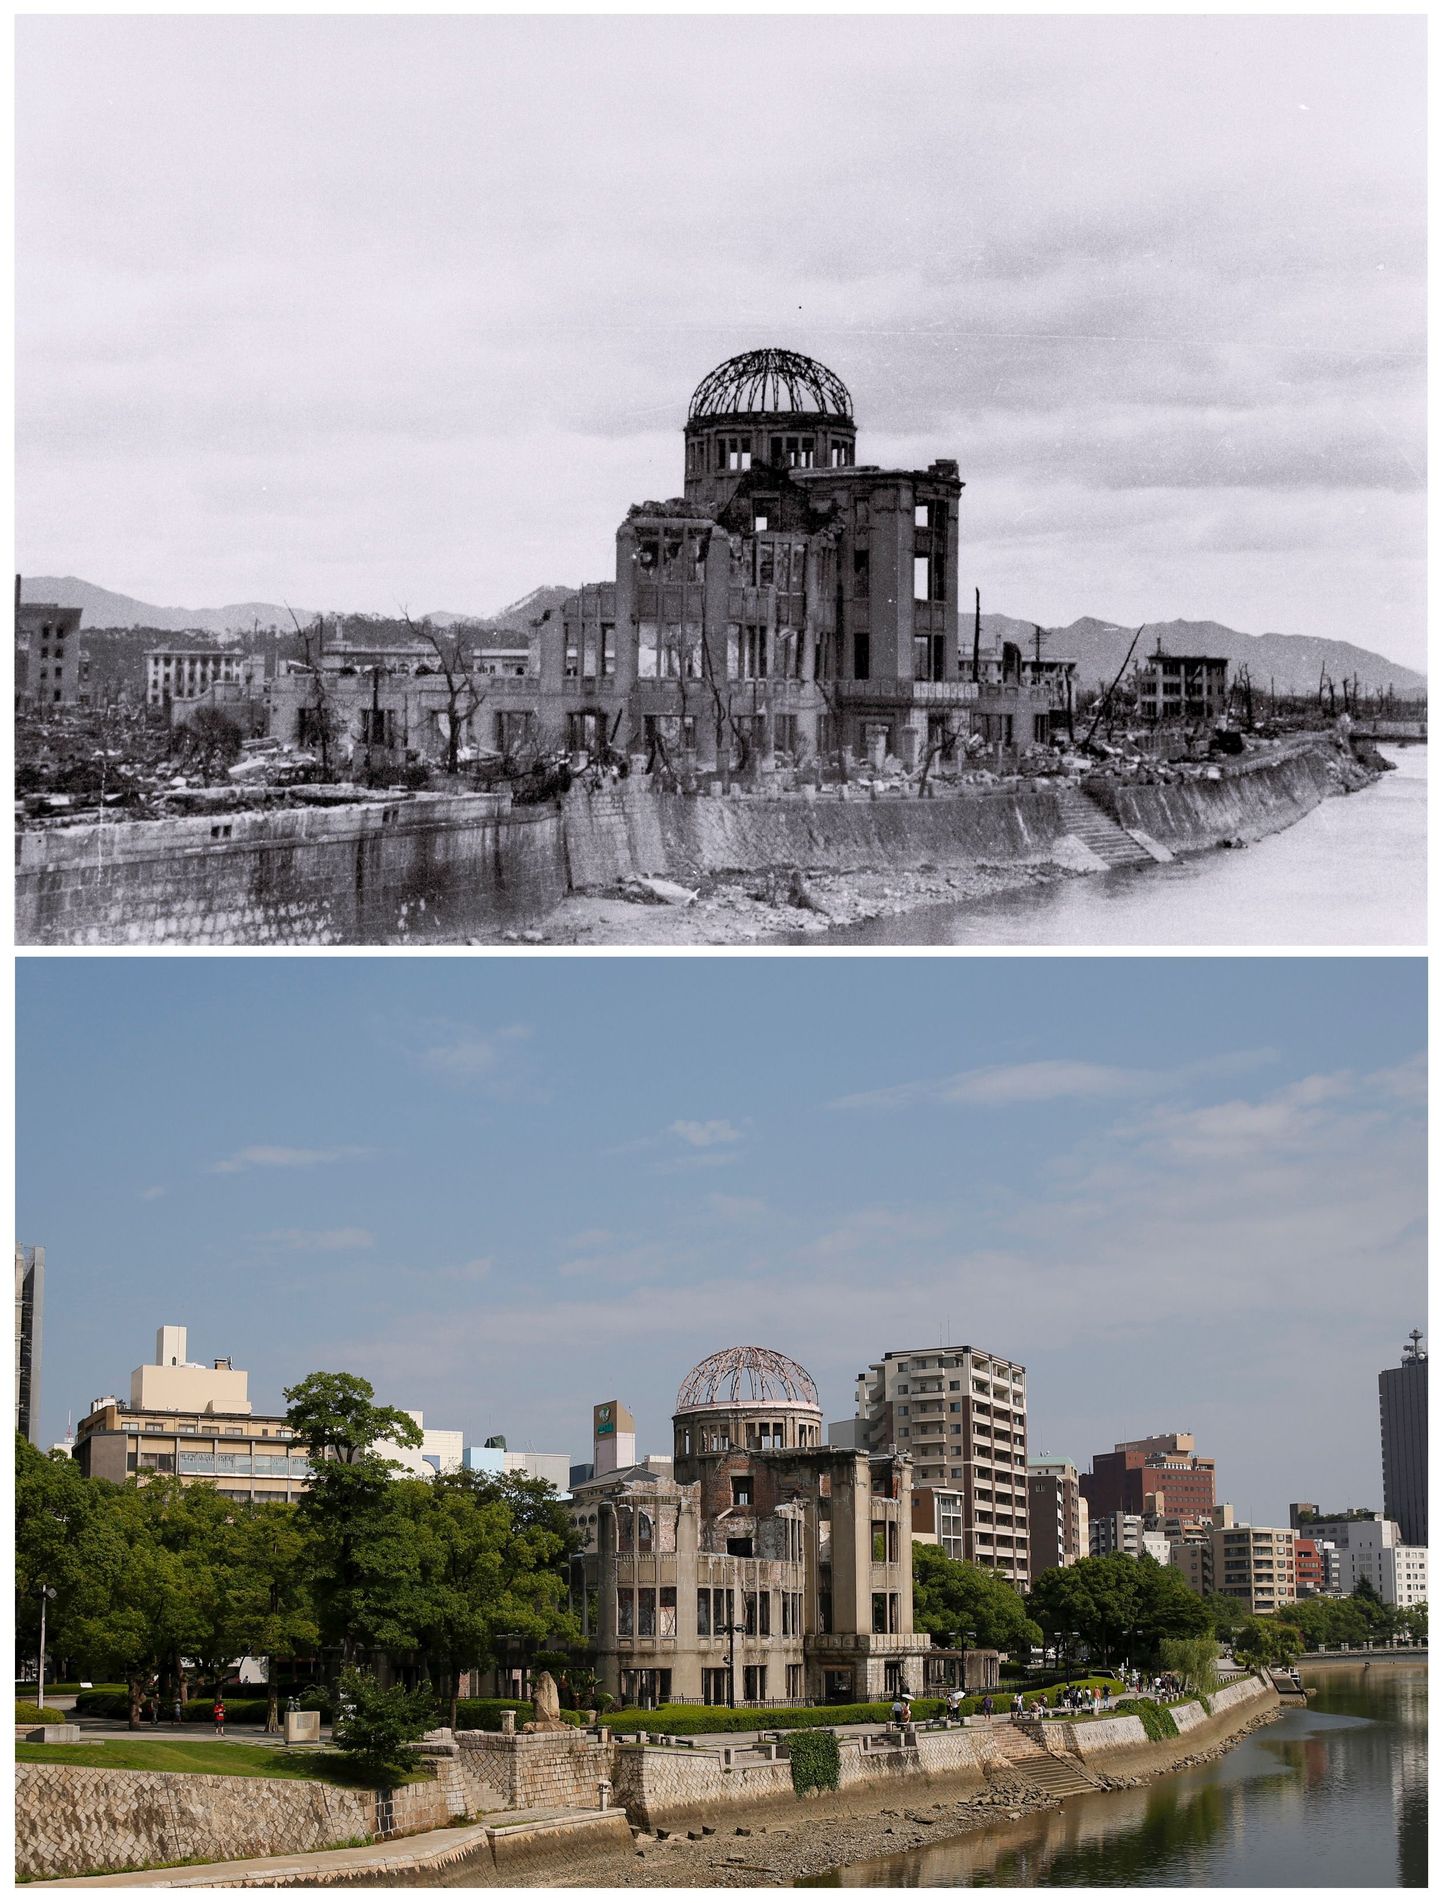 A combination picture shows the gutted Hiroshima Prefectural Industrial Promotion Hall (C), which is currently called the Atomic Bomb Dome or A-Bomb Dome, after the atomic bombing of Hiroshima on August 6, 1945, in this undated handout photo taken by Toshio Kawahara and released by his grandchild Yoshio Kawamoto (top), and the same location near Aioi Bridge in Hiroshima on July 28, 2015. On August 6, 1945, the U.S. dropped the atomic bomb on Hiroshima, killing about 140,000 by the end of the year, out of the 350,000 who lived in the city. Three days later, a second atomic bomb was dropped on Nagasaki. As the 70th anniversary of the world's first nuclear attack approaches, Reuters photographer Issei Kato sourced archive images of the cities in the aftermath of the bombing and revisited the same locations today. Mandatory credit REUTERS/Toshio Kawamoto/Yoshio Kawamoto/Handout via Reuters/Issei Kato   TPX IMAGES OF THE DAYPICTURE 1 OF 10 FOR WIDER IMAGE STORY "HIROSHIMA AND NAGASAKI - AFTER THE ATOMIC BOMB".SEARCH "KATO ATOMIC" FOR ALL PICTURES.ATTENTION EDITORS - THIS PICTURE WAS PROVIDED BY A THIRD PARTY. REUTERS IS UNABLE TO INDEPENDENTLY VERIFY THE AUTHENTICITY, CONTENT, LOCATION OR DATE OF THIS IMAGE. NO SALES. NO ARCHIVES. FOR EDITORIAL USE ONLY. NOT FOR SALE FOR MARKETING OR ADVERTISING CAMPAIGNS. MANDATORY CREDIT. THIS PICTURE IS DISTRIBUTED EXACTLY AS RECEIVED BY REUTERS, AS A SERVICE TO CLIENTS.